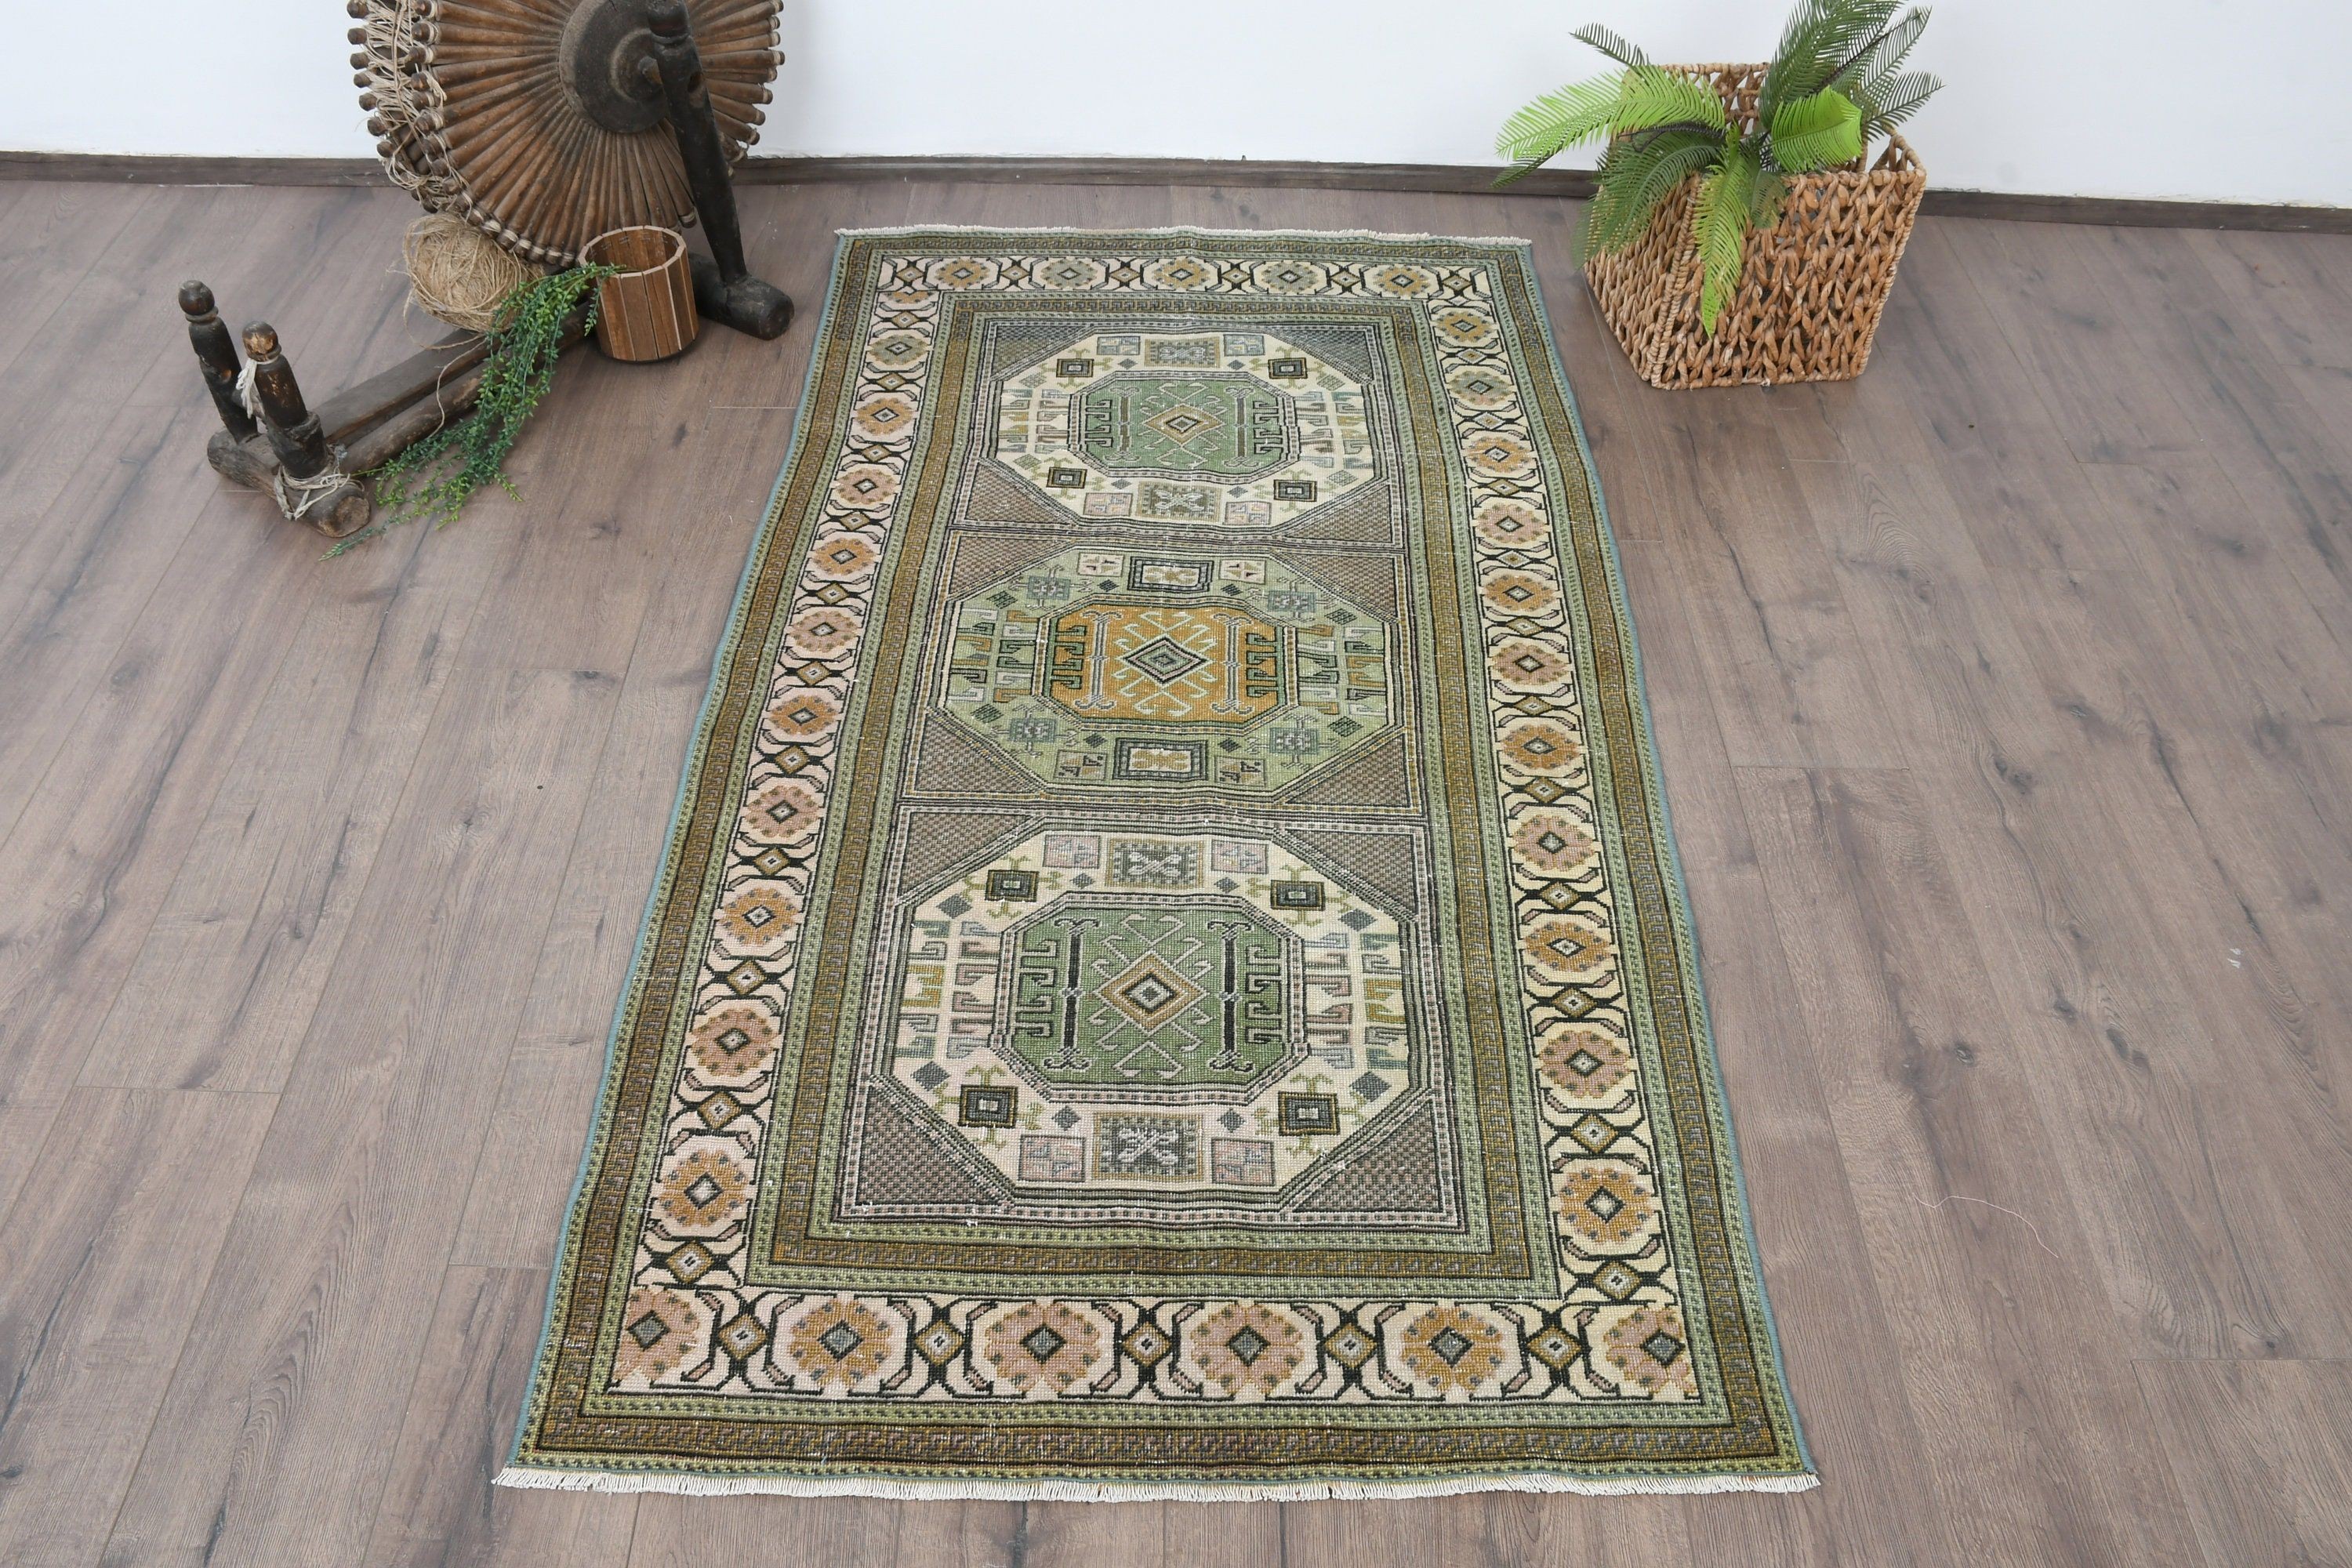 Turkish Rug, Kitchen Rug, Nursery Rugs, Green Anatolian Rug, 3.1x5.9 ft Accent Rug, Rugs for Kitchen, Vintage Rug, Cool Rugs, Moroccan Rug